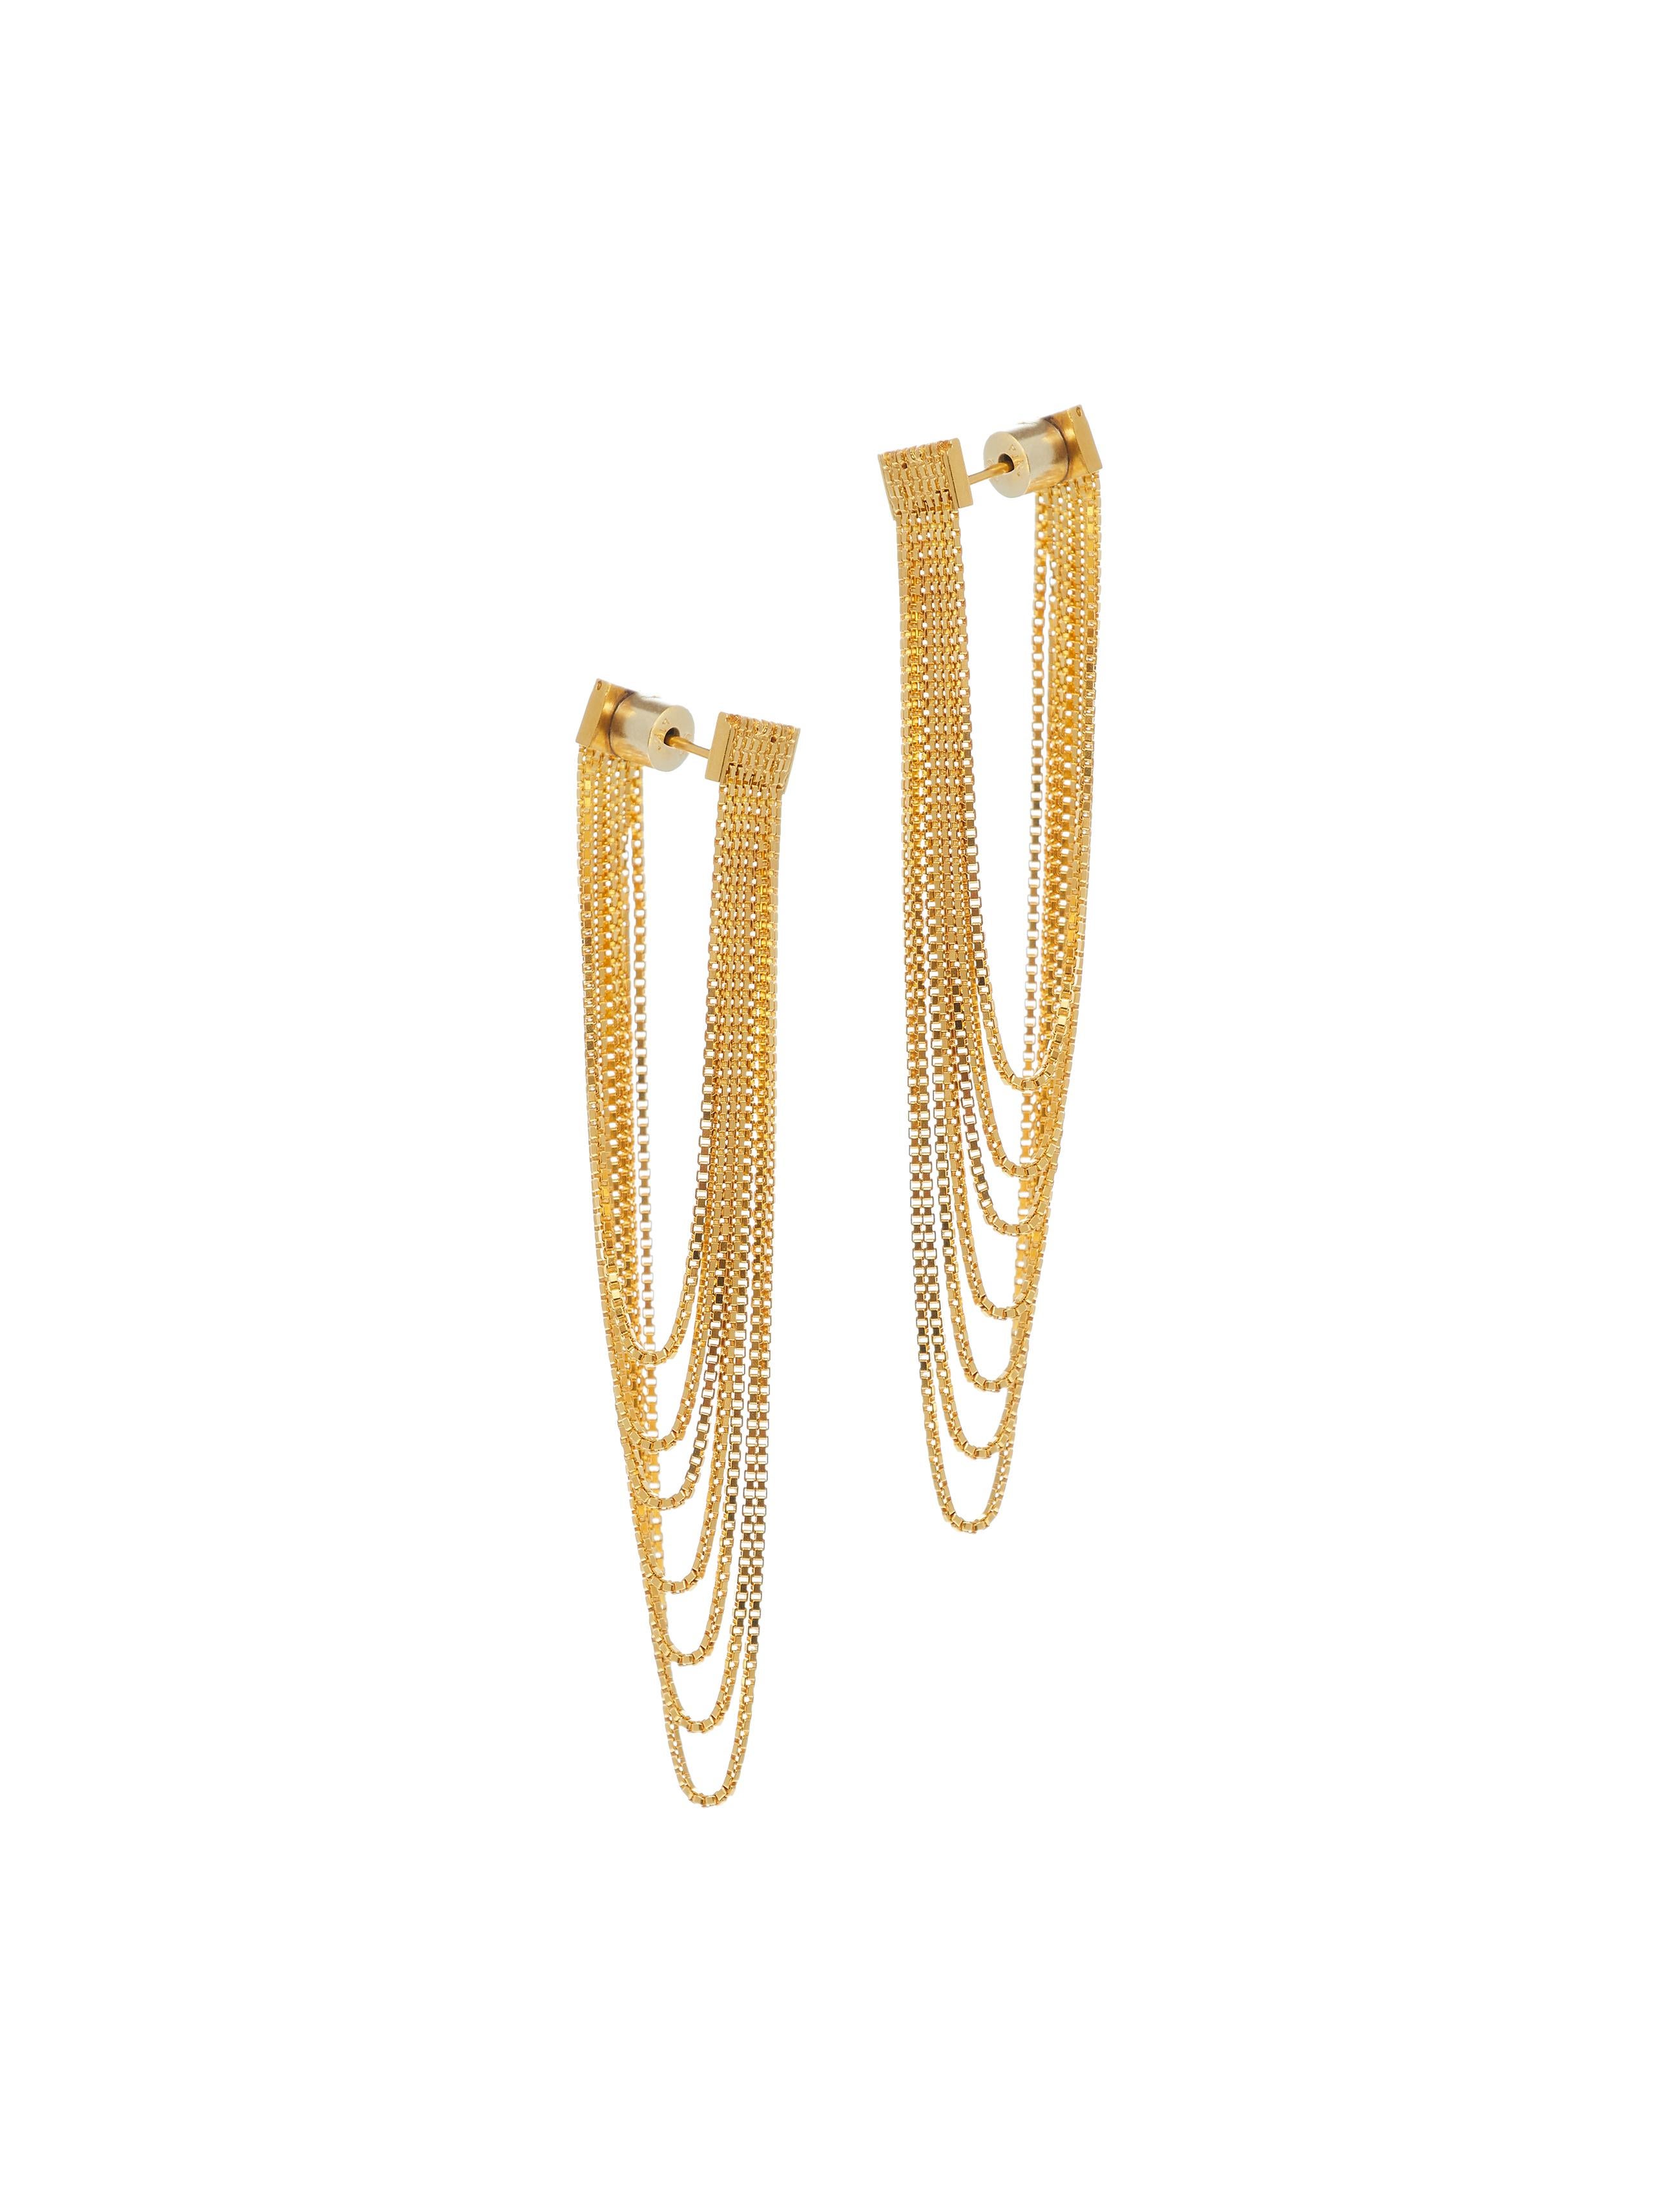 Silver 18k Gold Plated Earrings Box Chain Long Movement Handmade Greek Jewelry For Sale 2